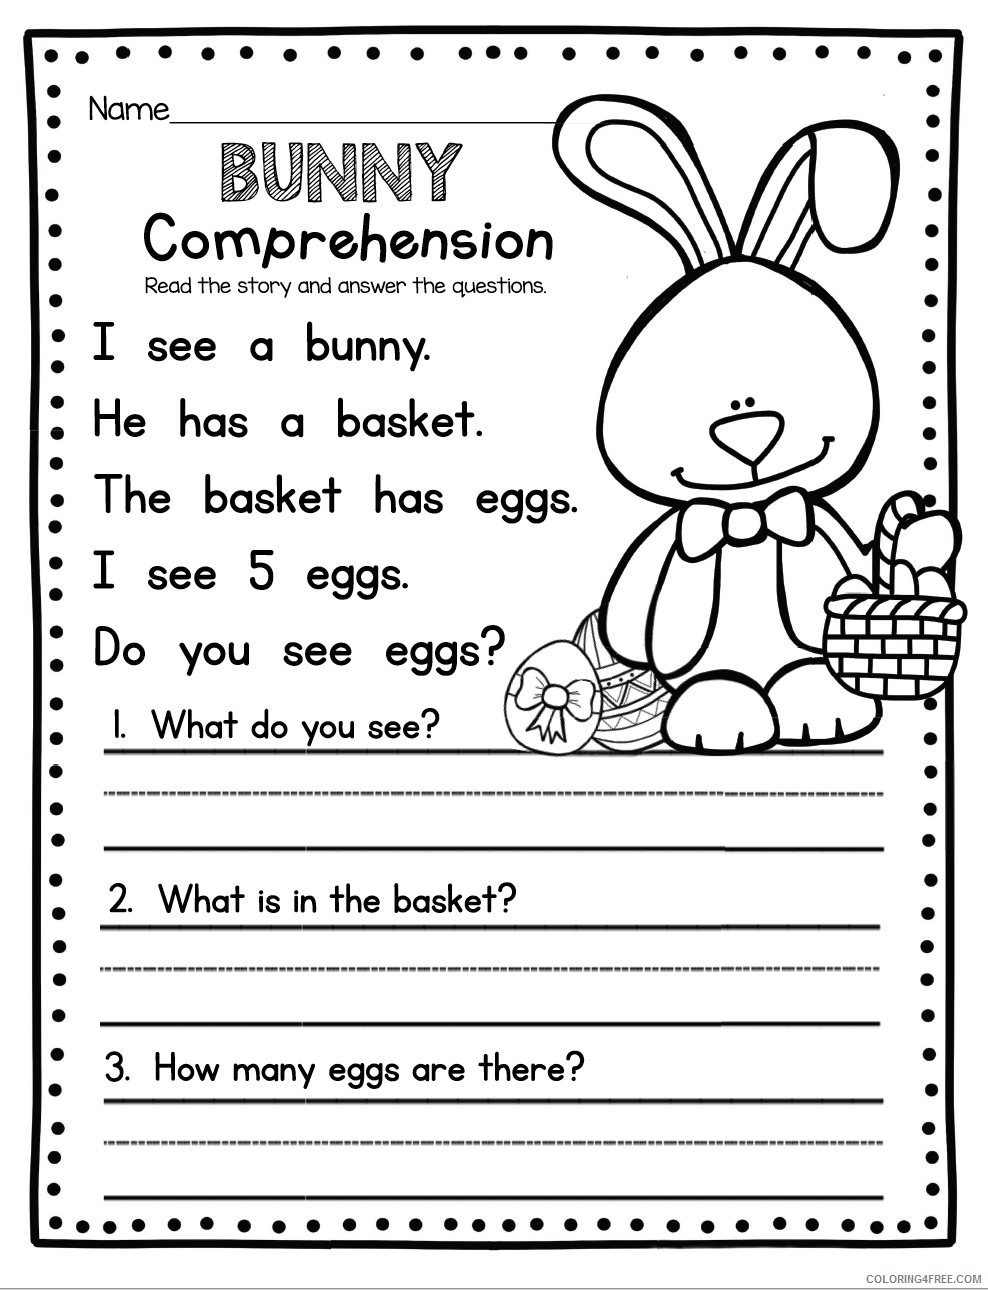 Easter Coloring Pages Holiday Easter Comprehension Worksheet Printable 2021 0288 Coloring4free